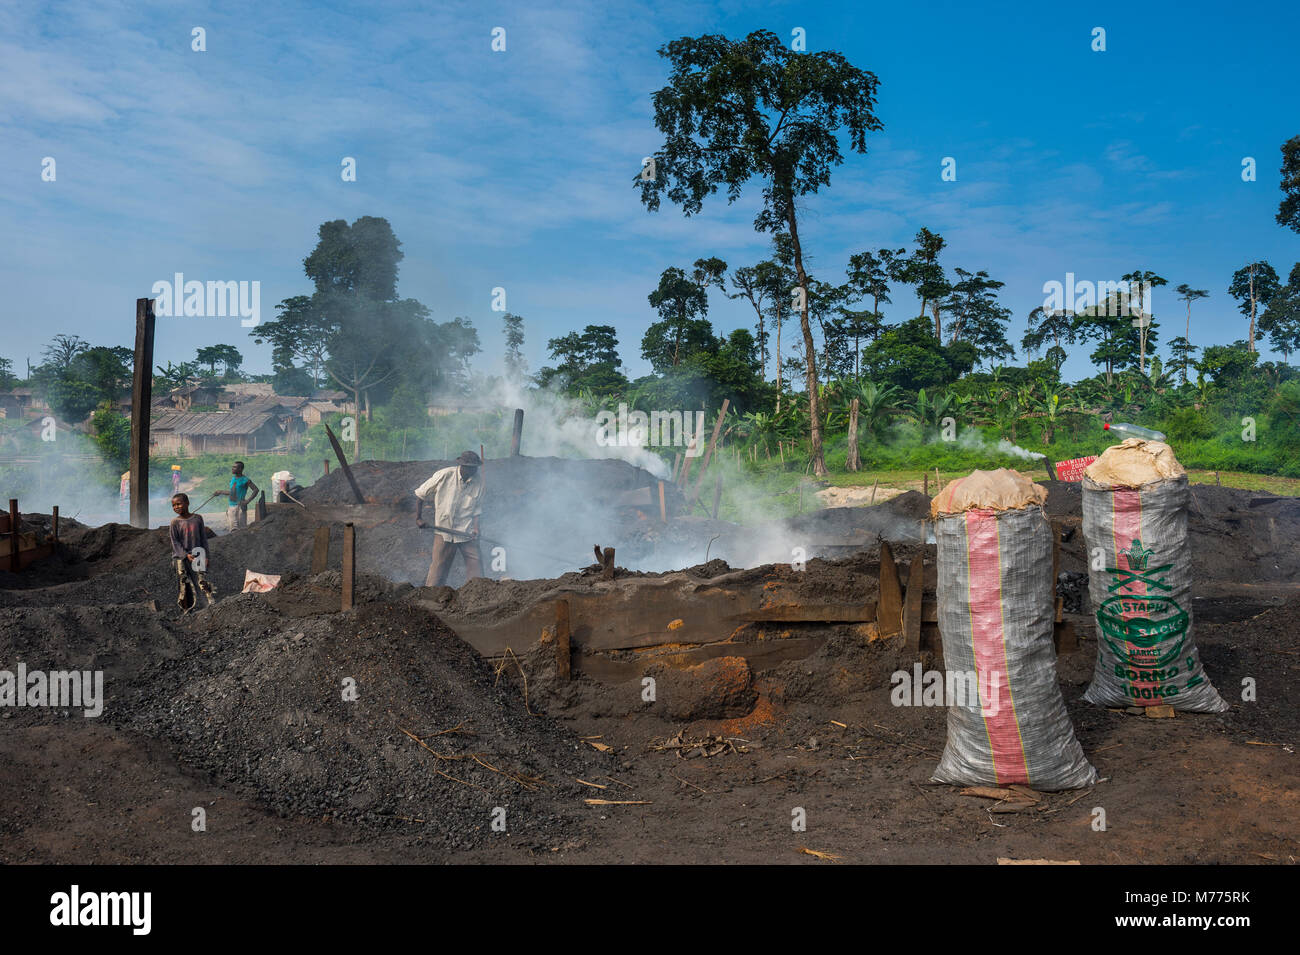 Coal production out of wood (charcoal), Libongo, deep in the jungle, Cameroon, Africa Stock Photo